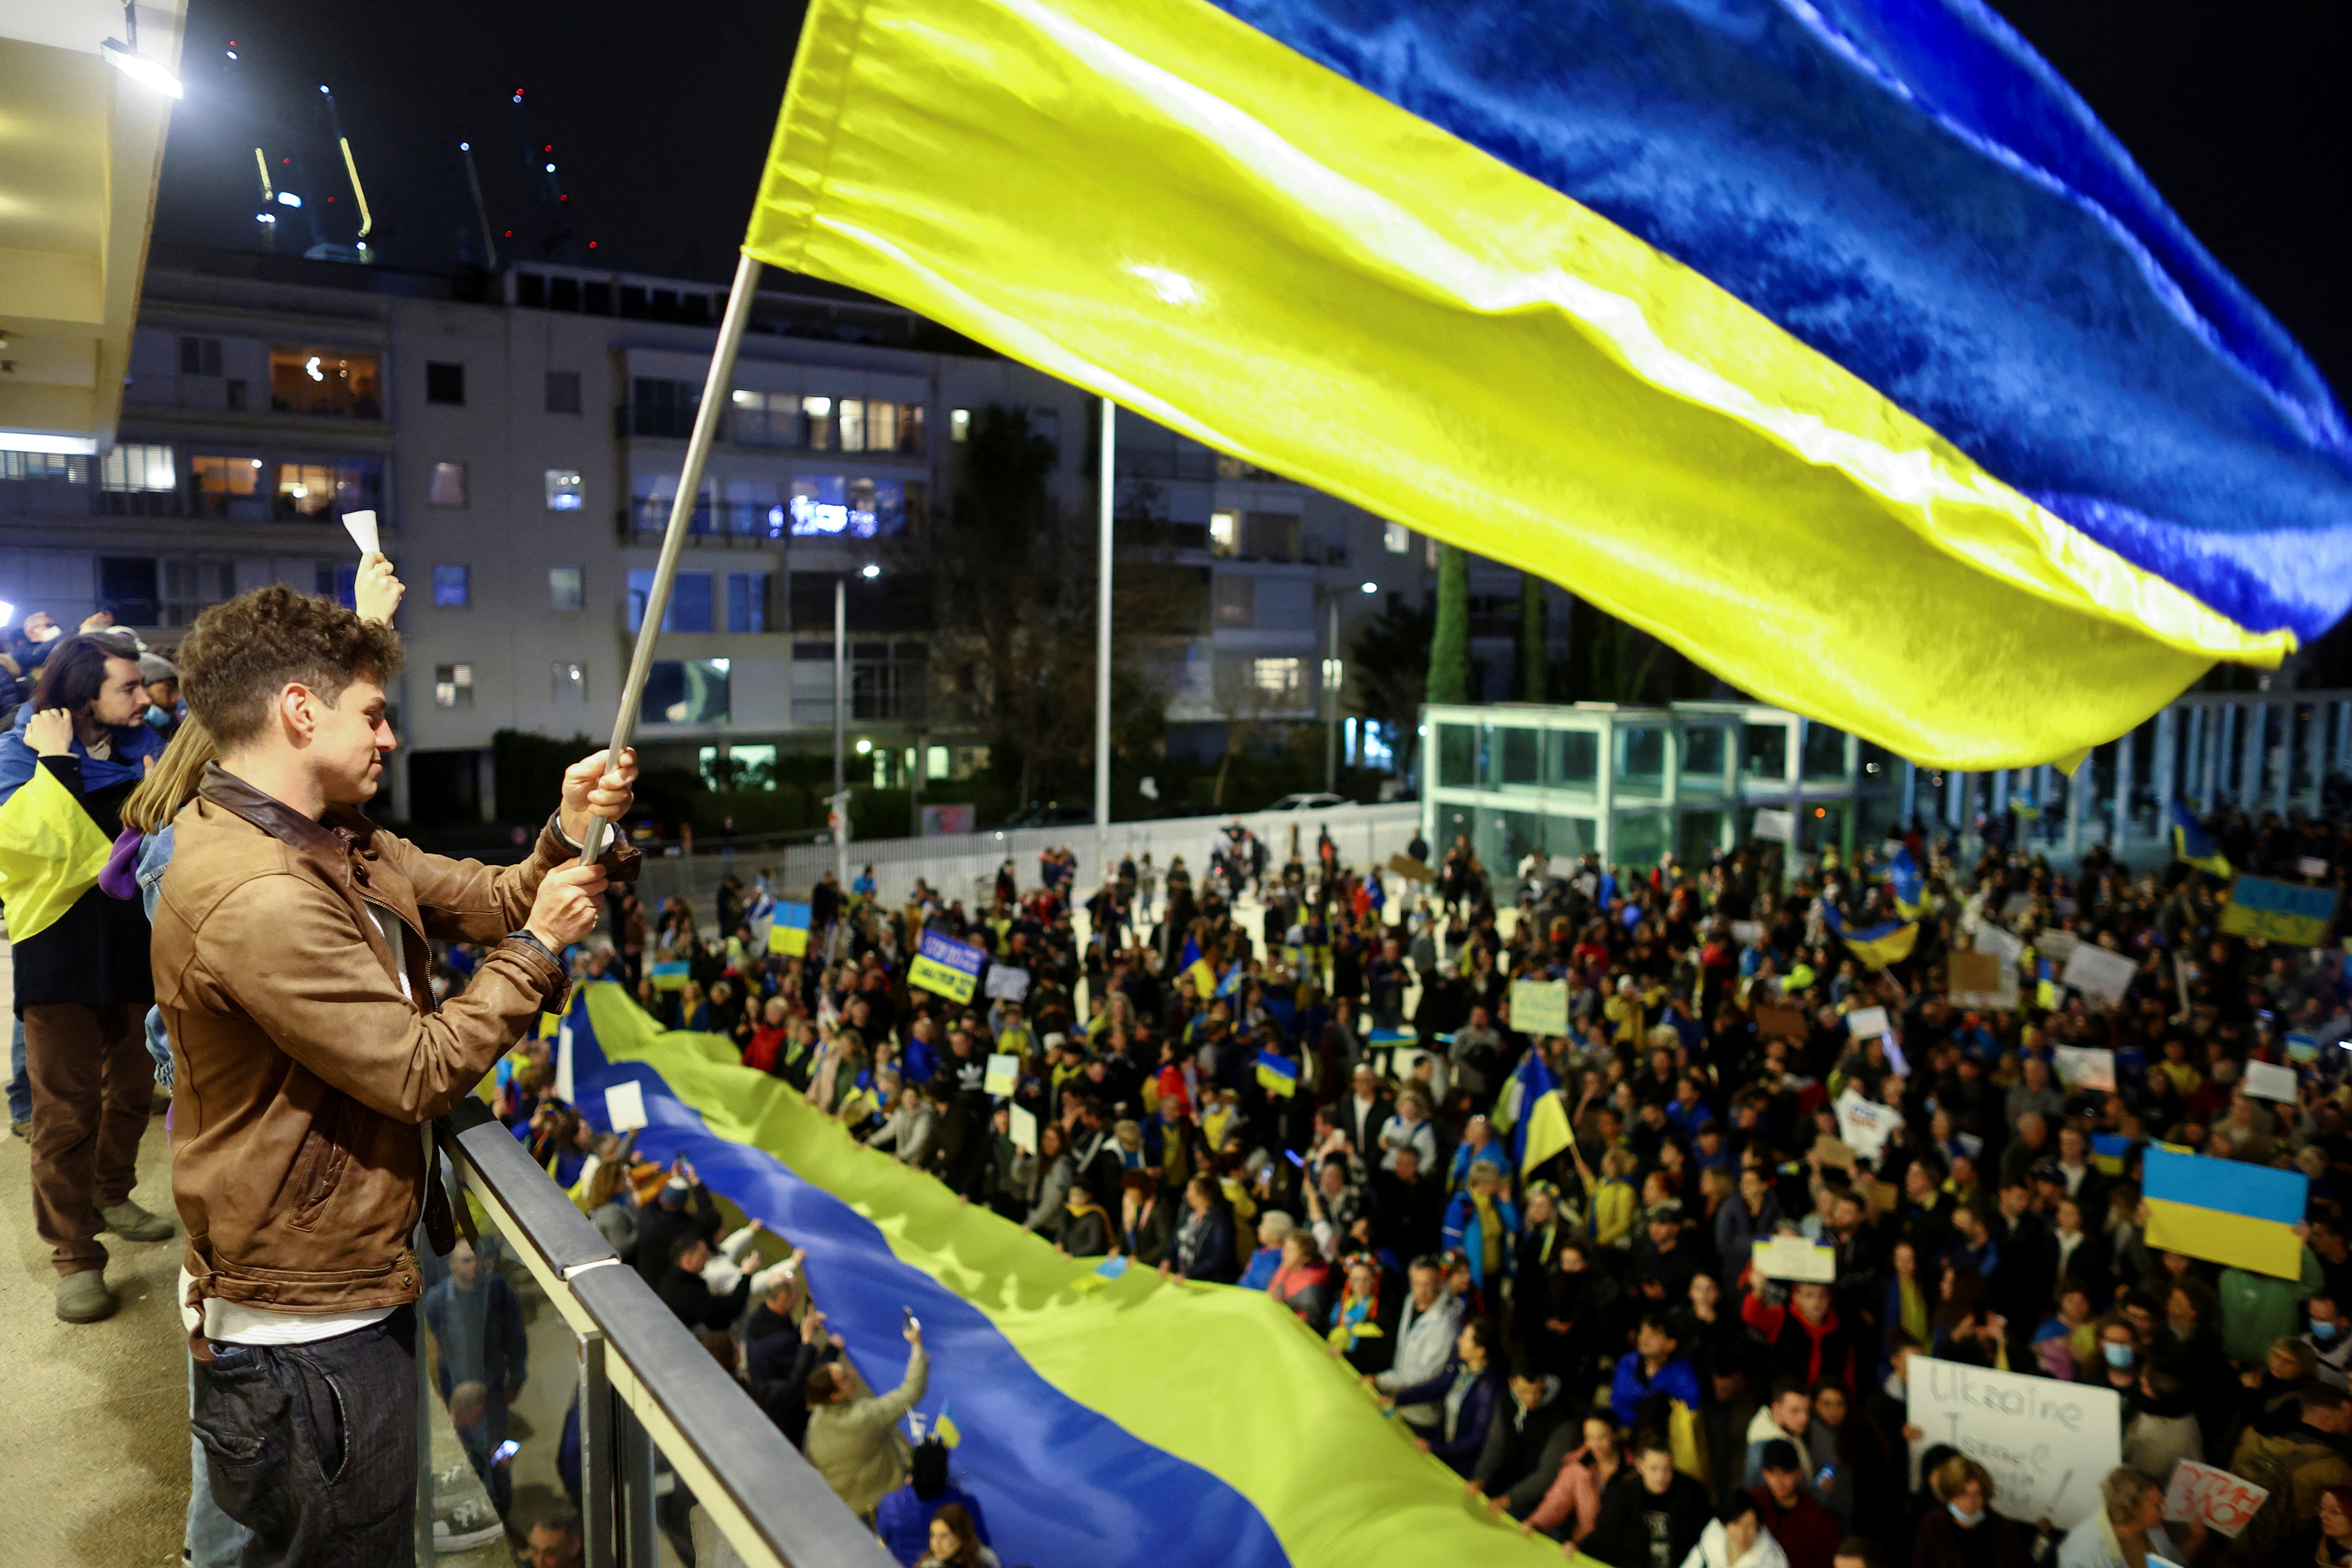 A man waves a flag from a balcony in front of demonstrators attending a rally in support of Ukraine, after Russia launched a massive military operation against Ukraine, in Tel Aviv, Israel